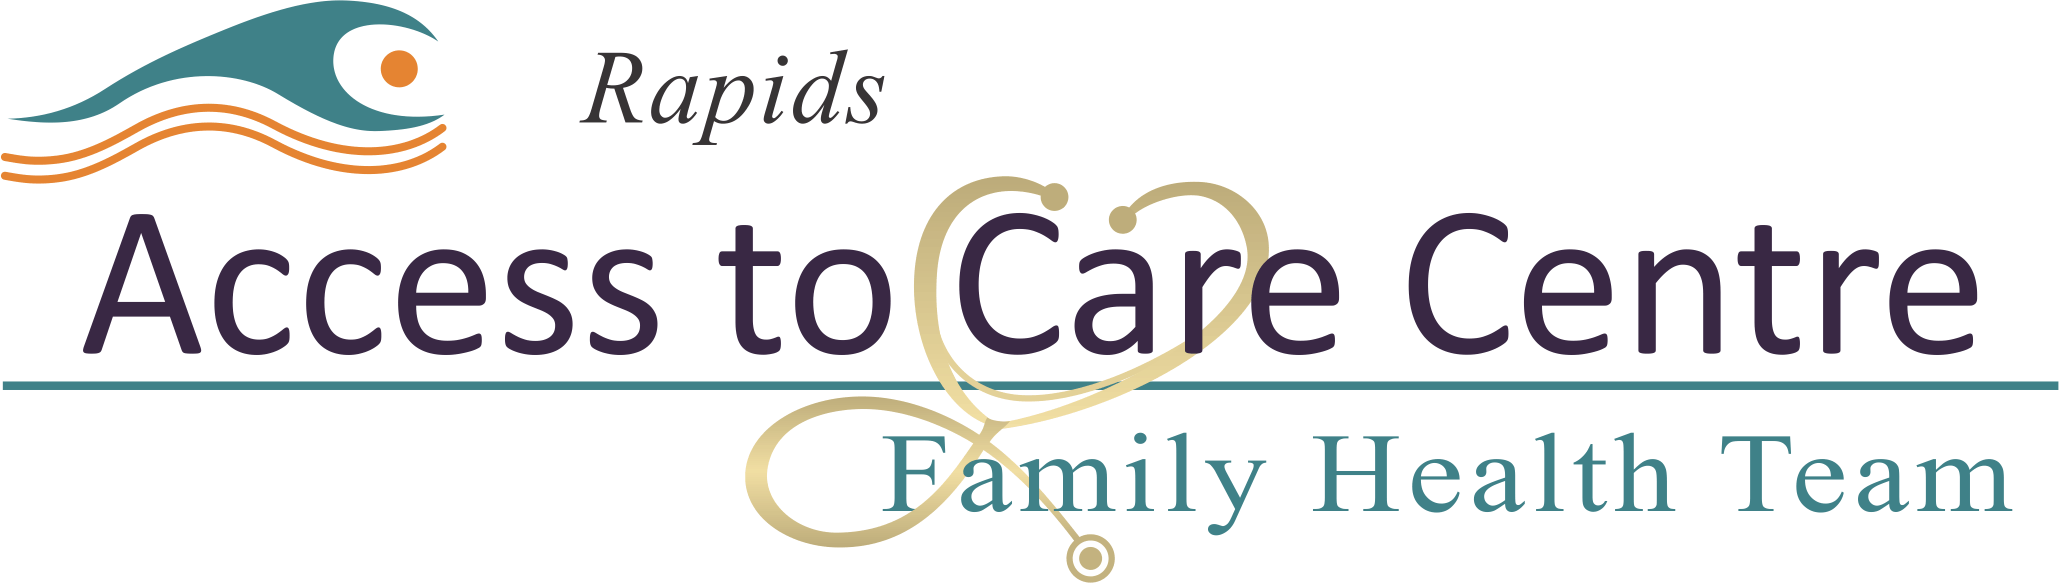 Rapids Family Health Team_Access To Care Centre_logo_CMYK (1).png